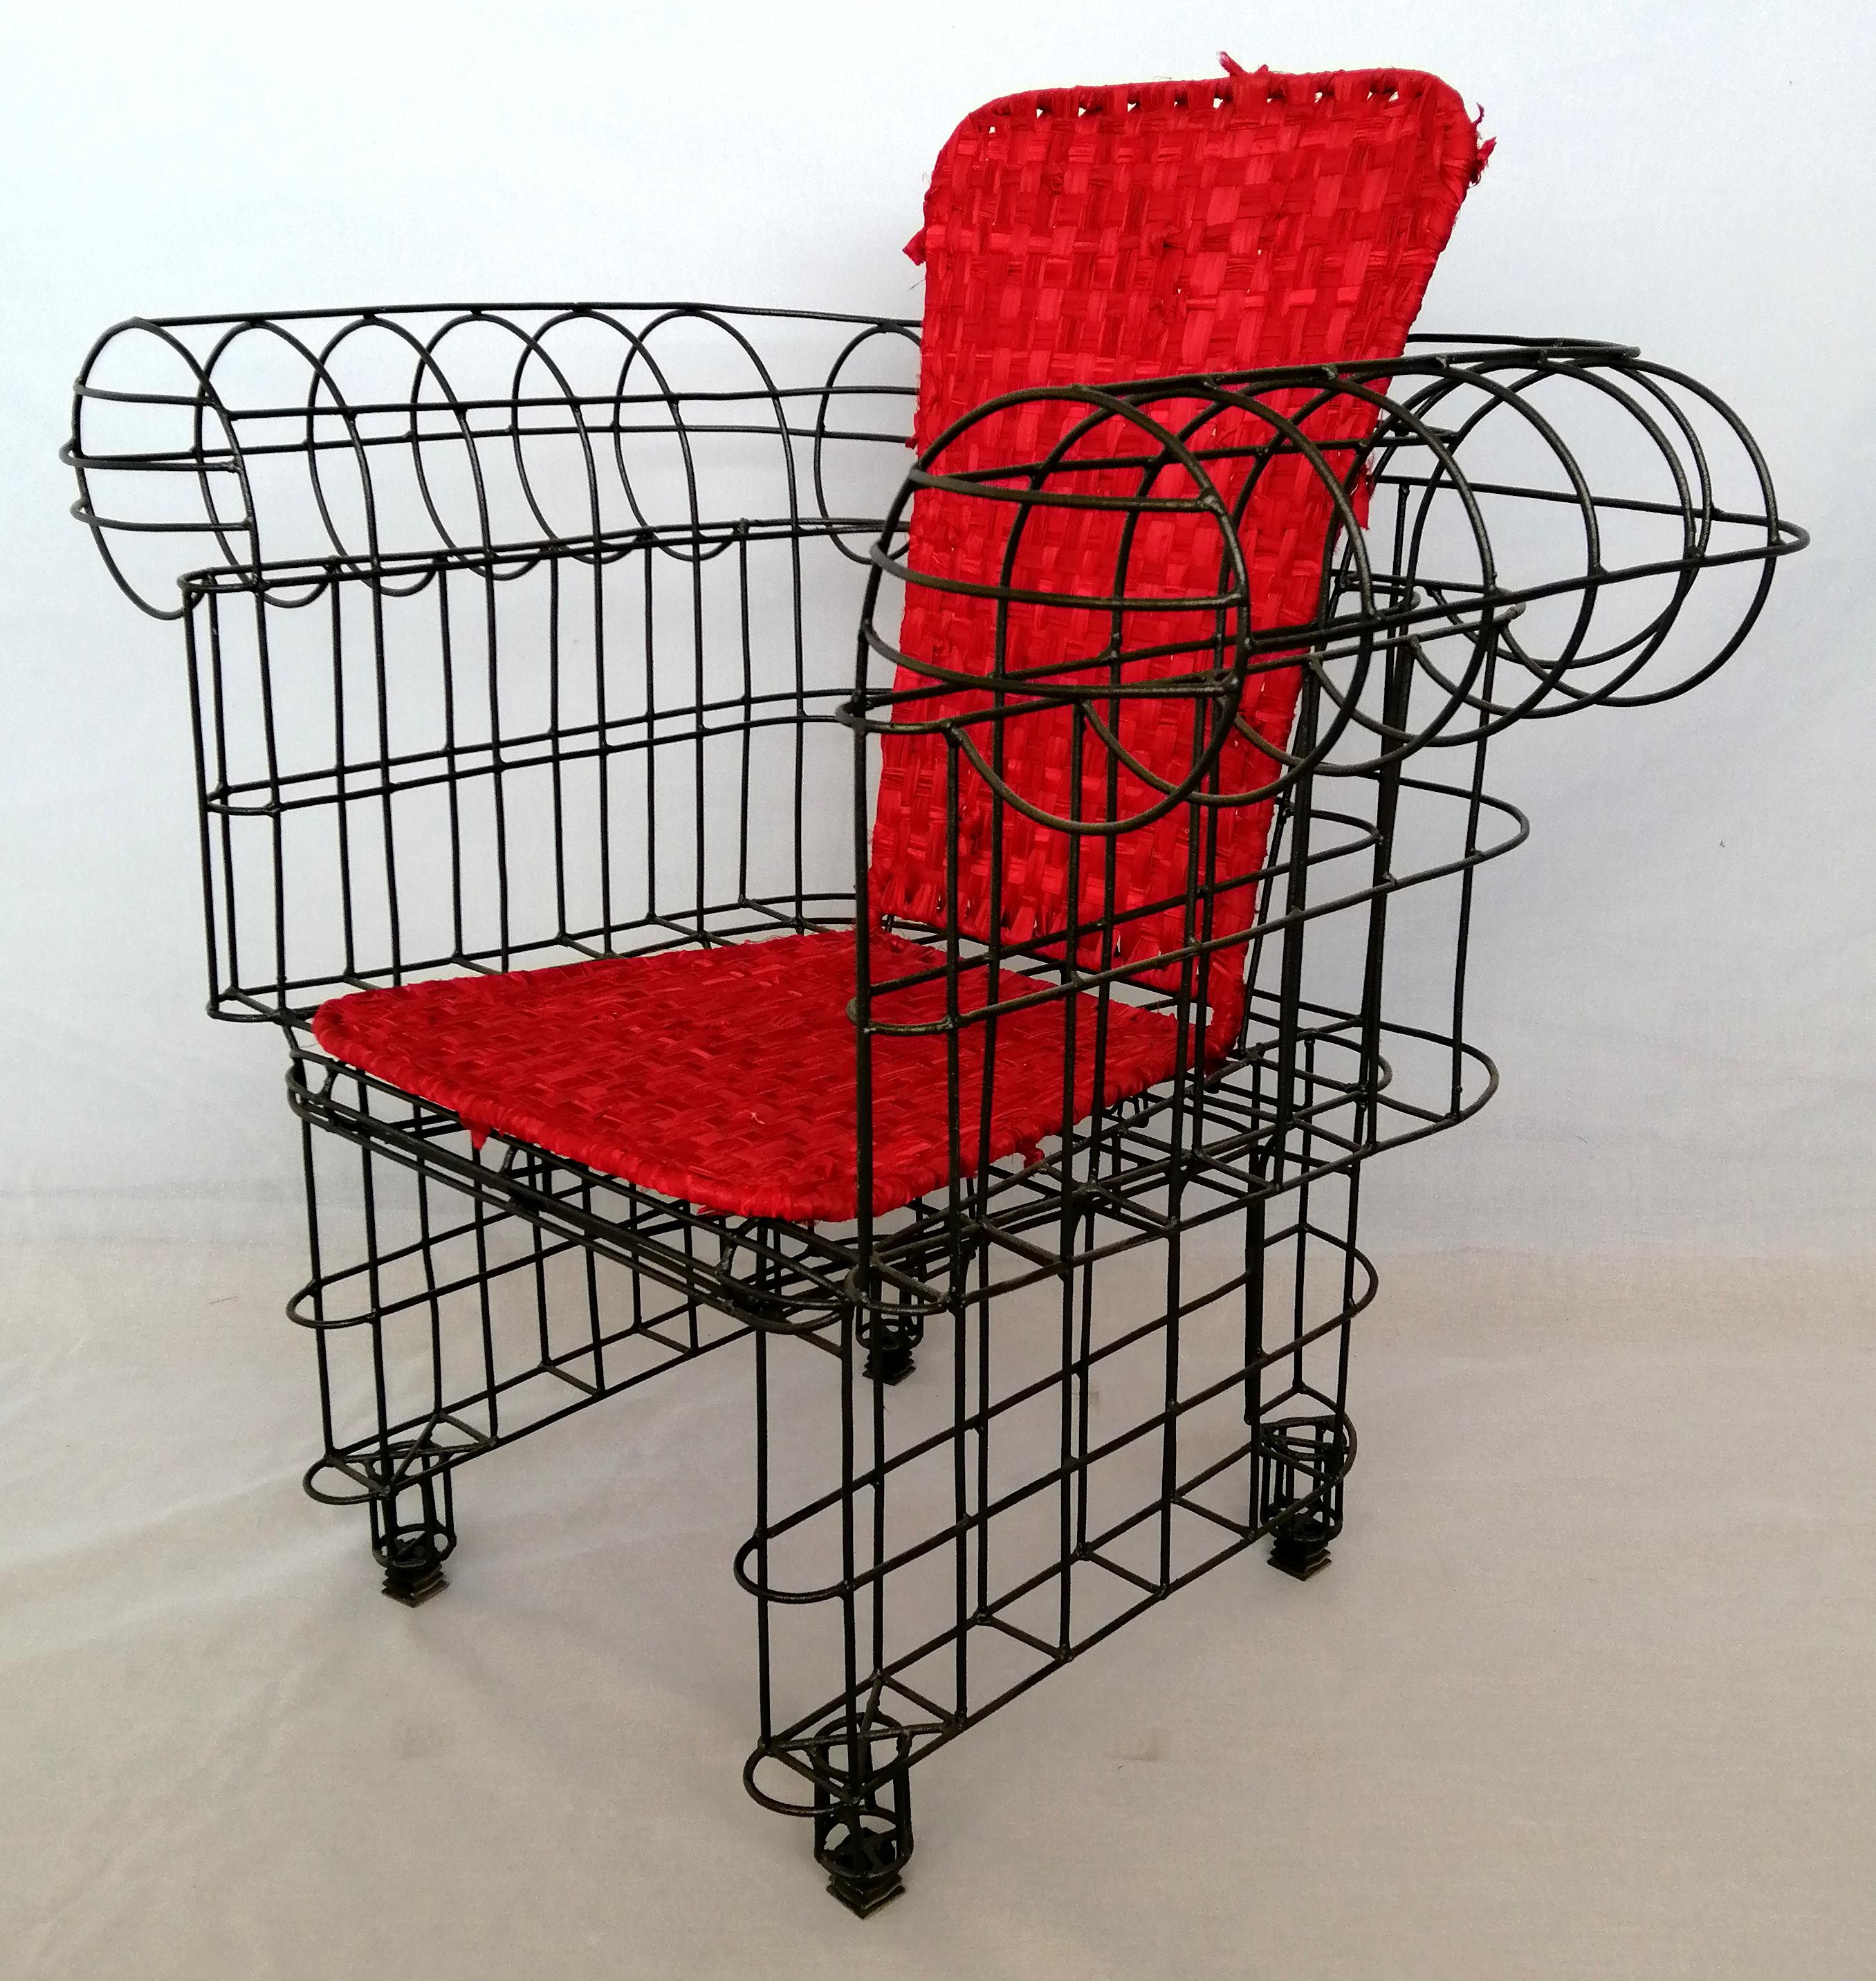 Construction technique: hand-welded structure with Minimalist technique, seat and back covered in hand knotted red fabric.
Color: black and red.
 